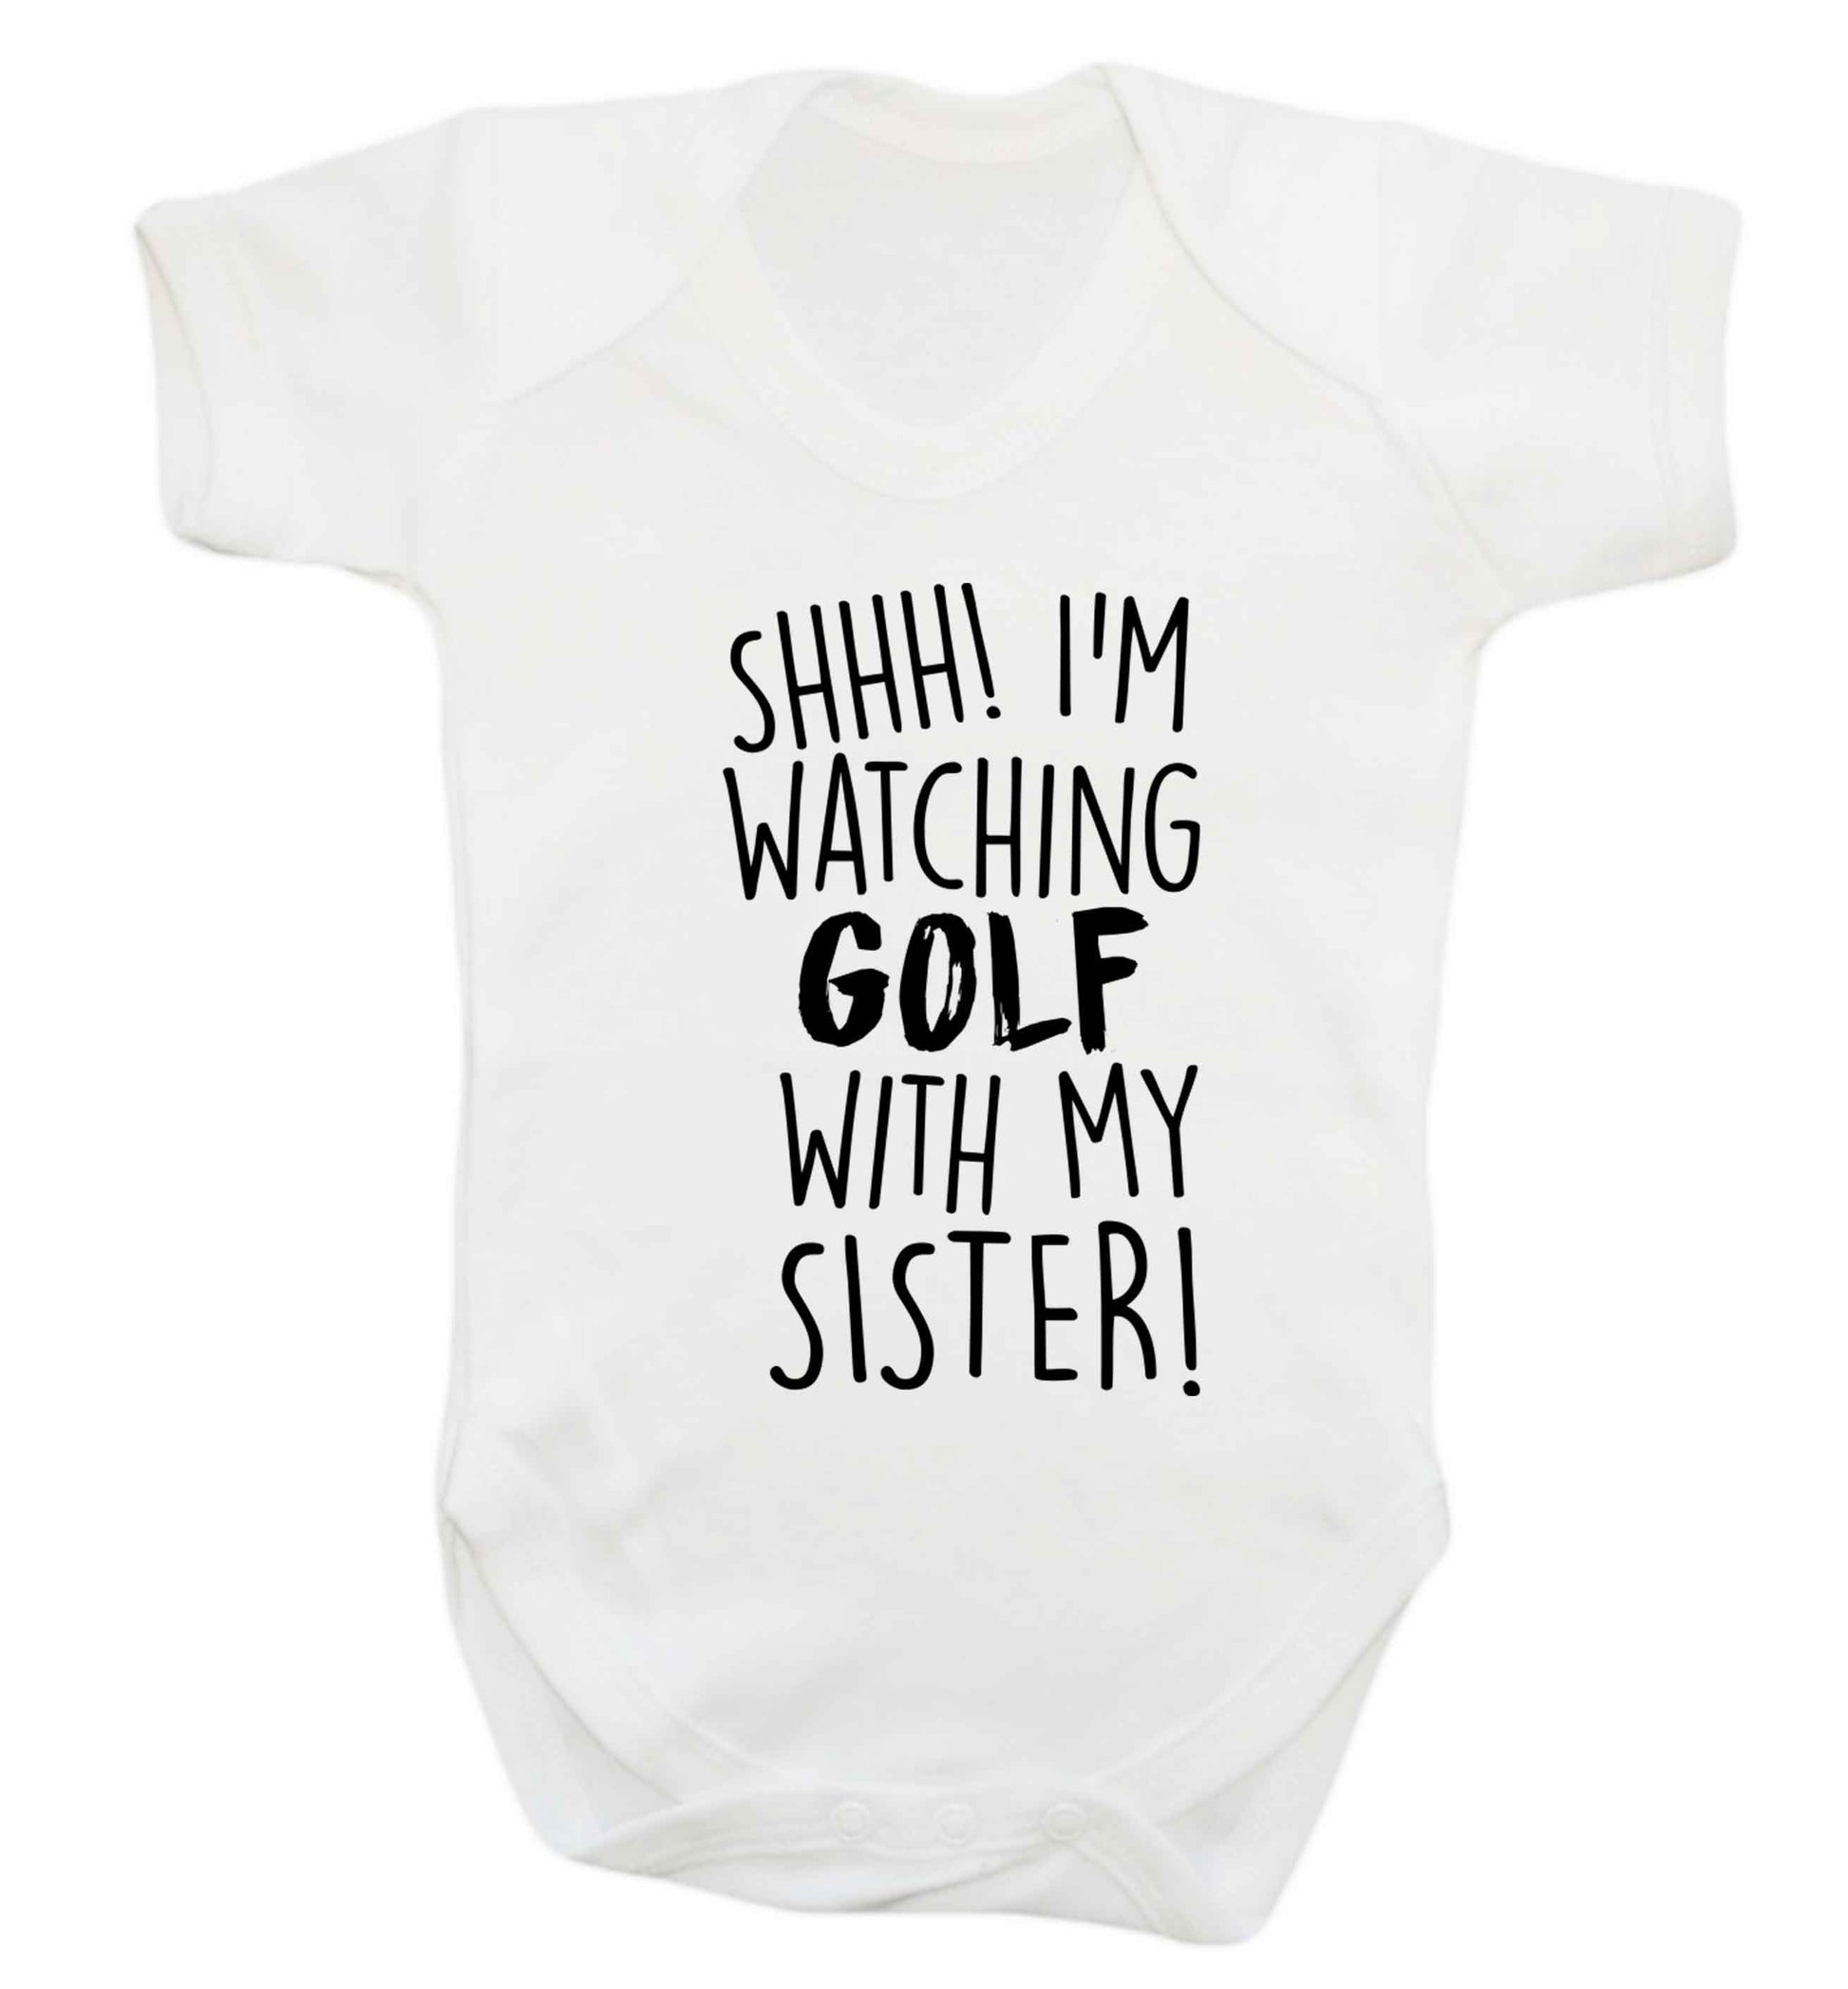 Shh I'm watching golf with my sister Baby Vest white 18-24 months